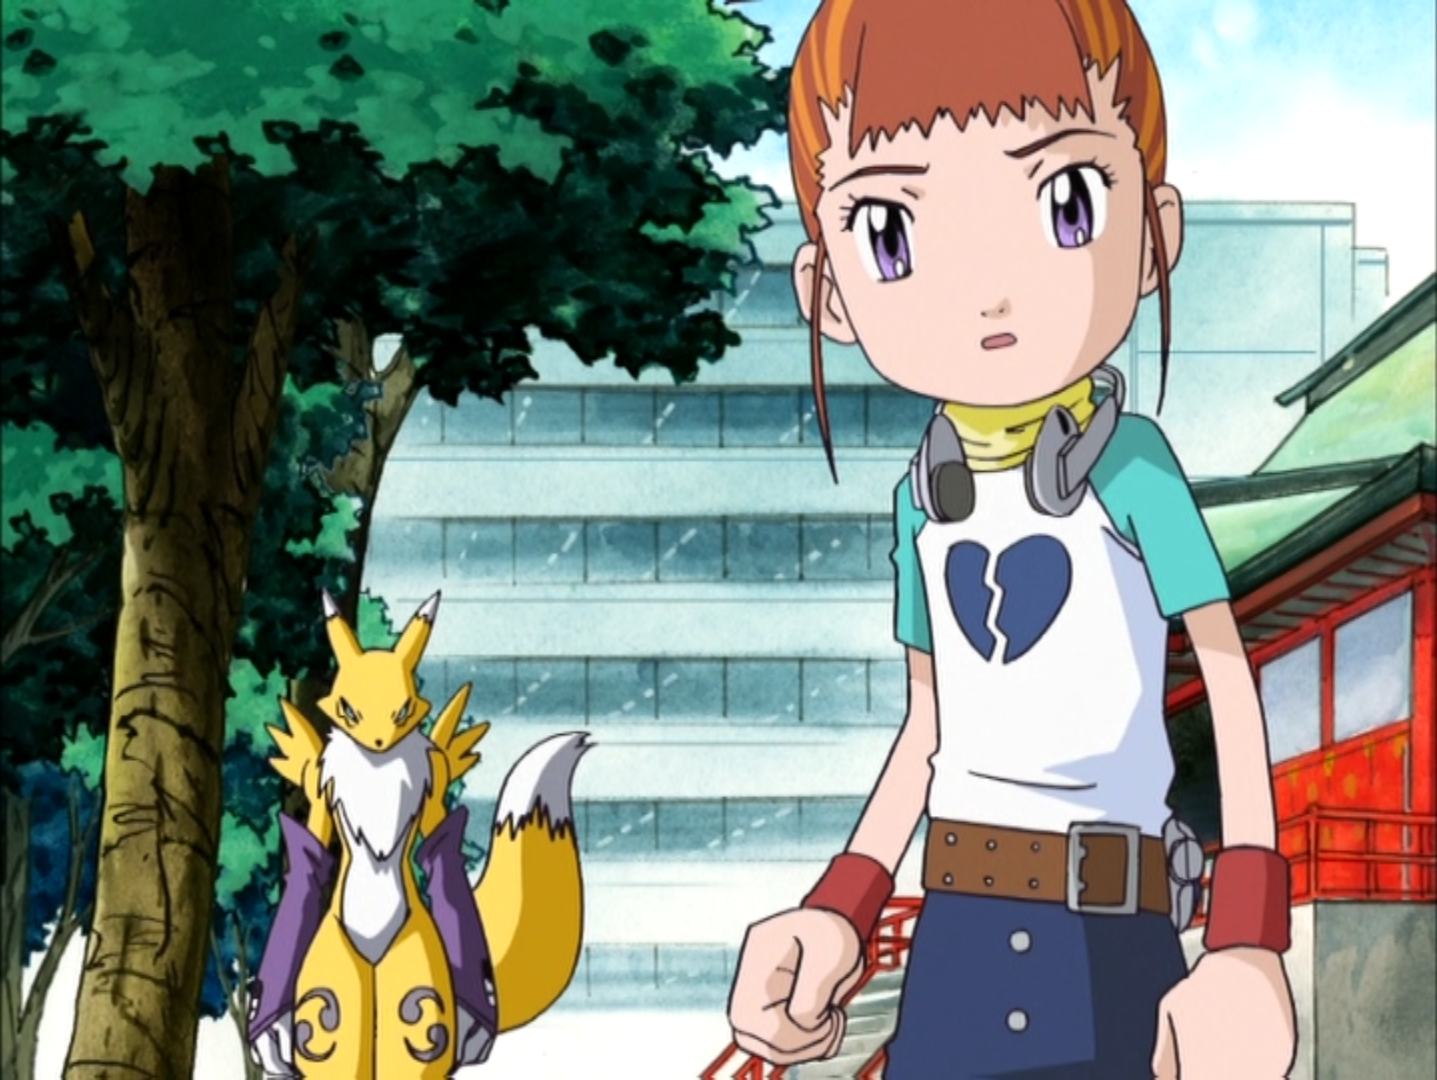 Digimon tamers characters